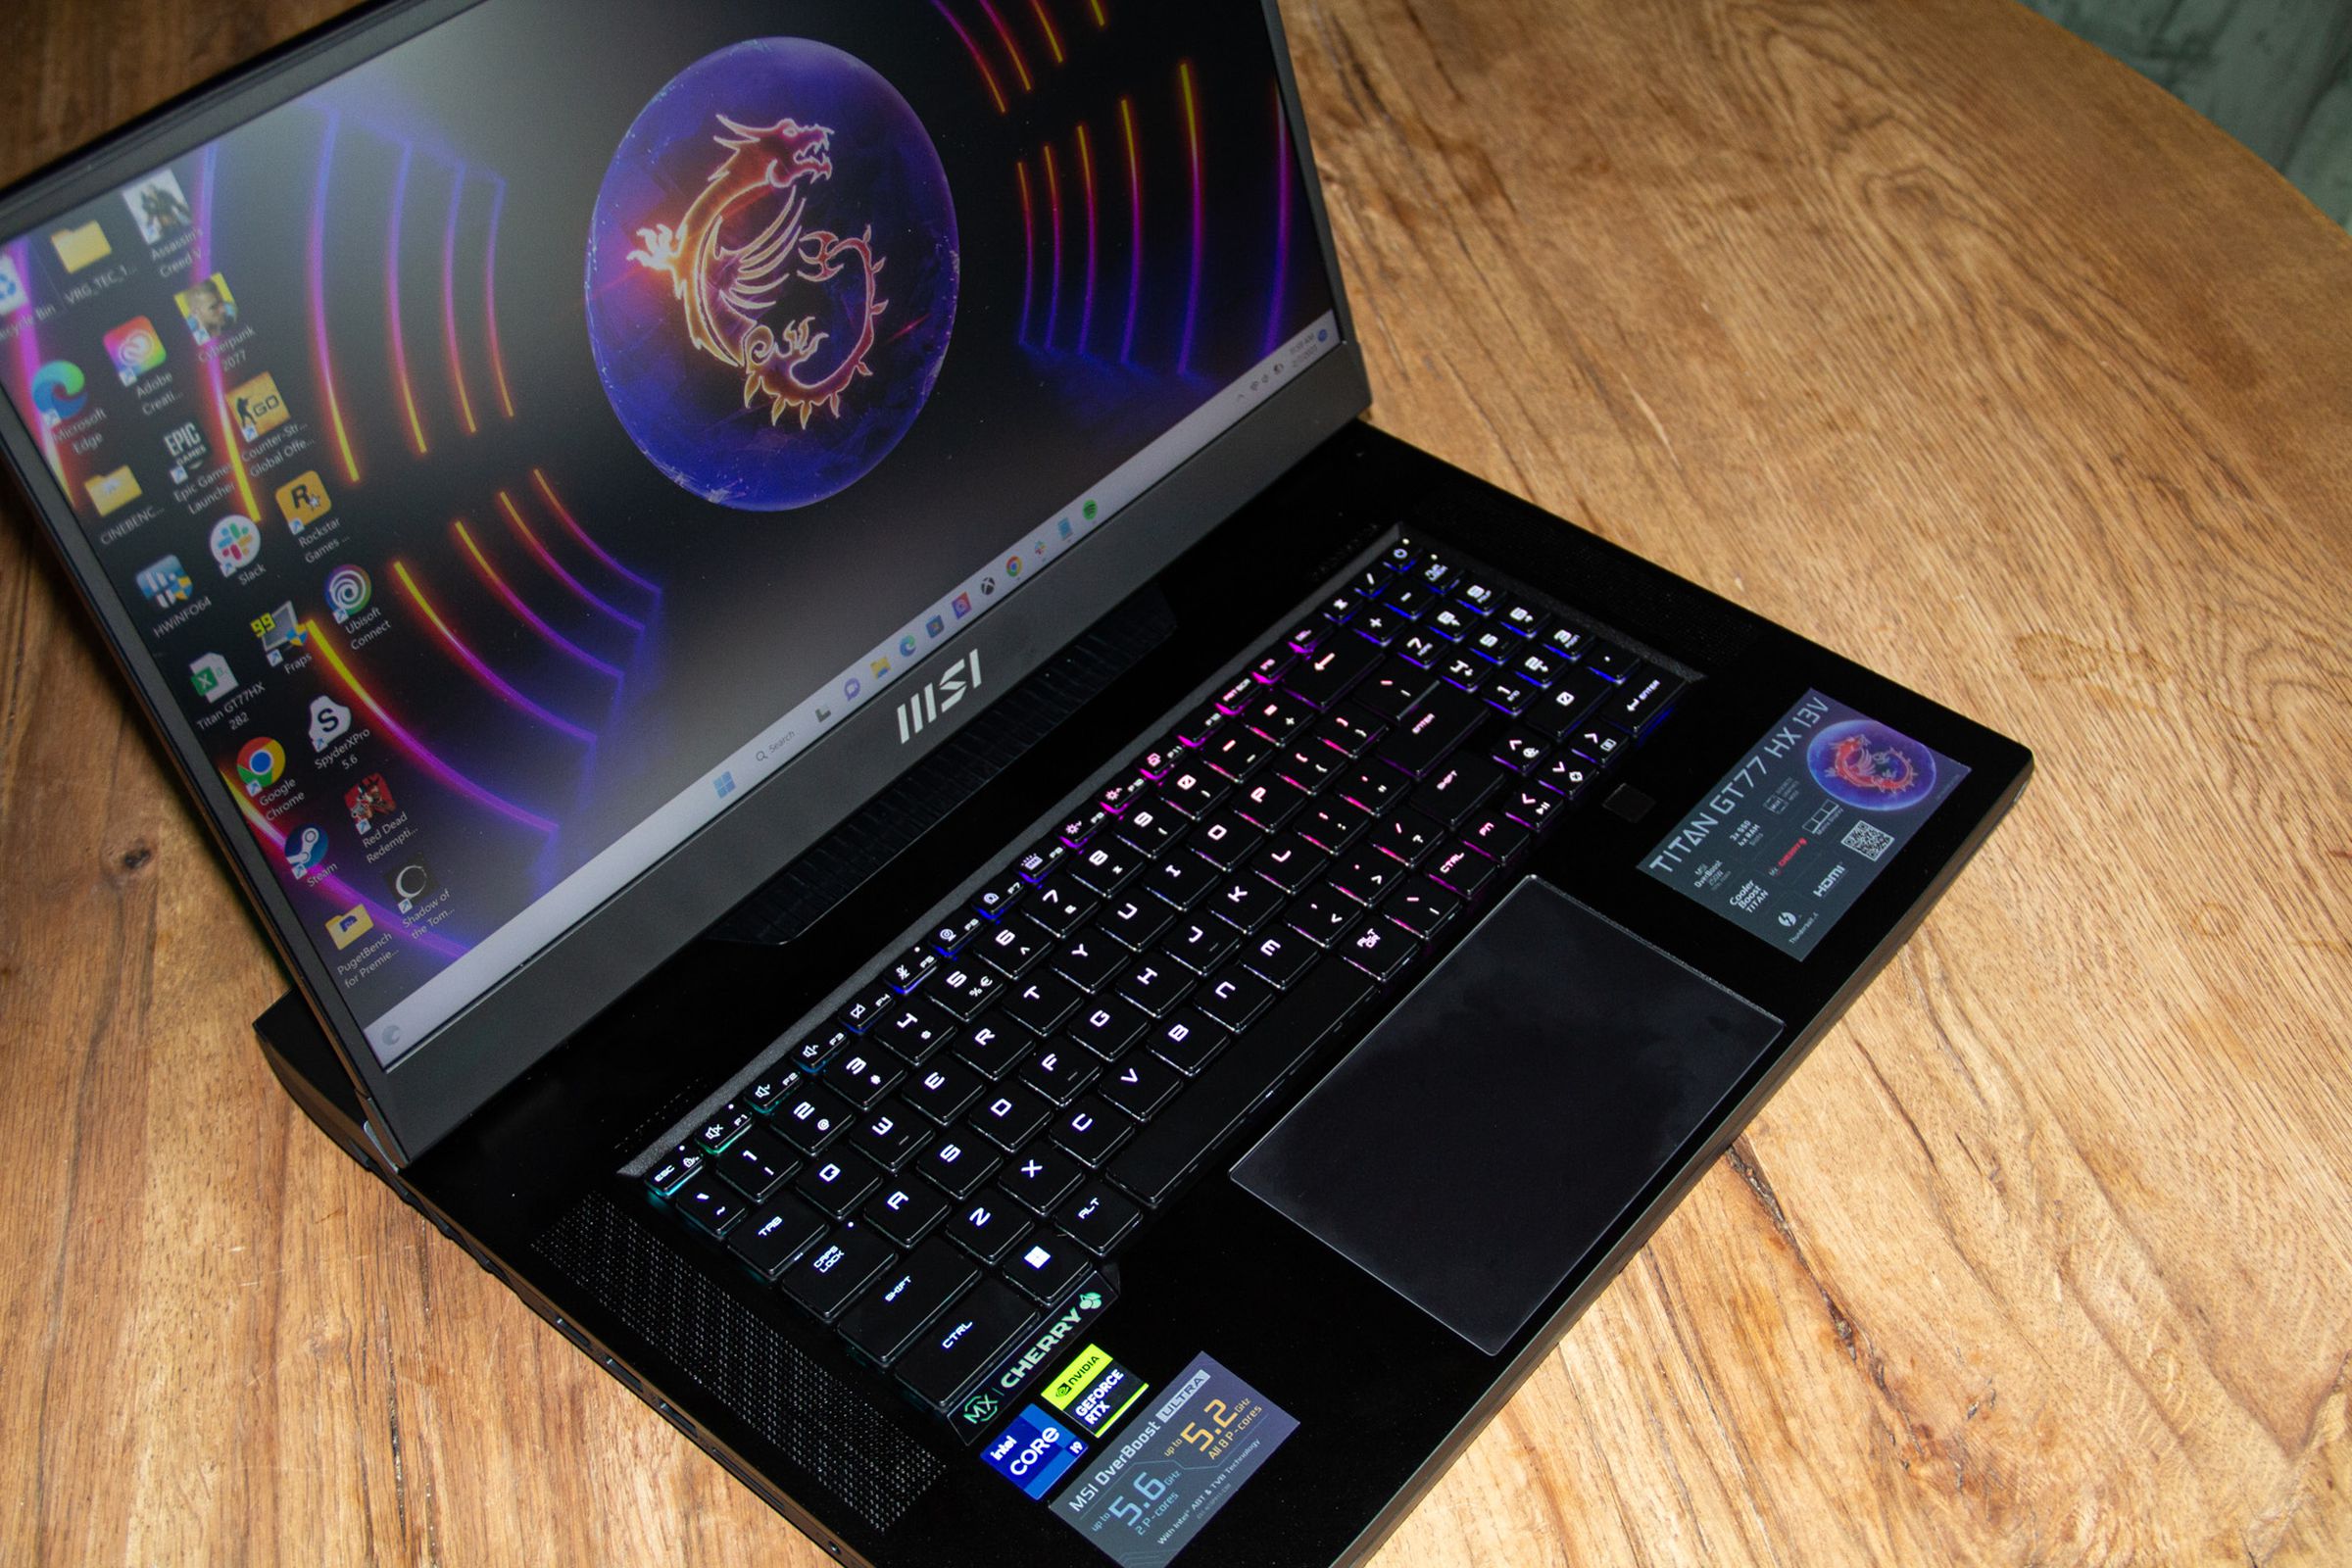 The MSI Titan GT77HX seen from above, displaying the MSI logo on a desktop background.